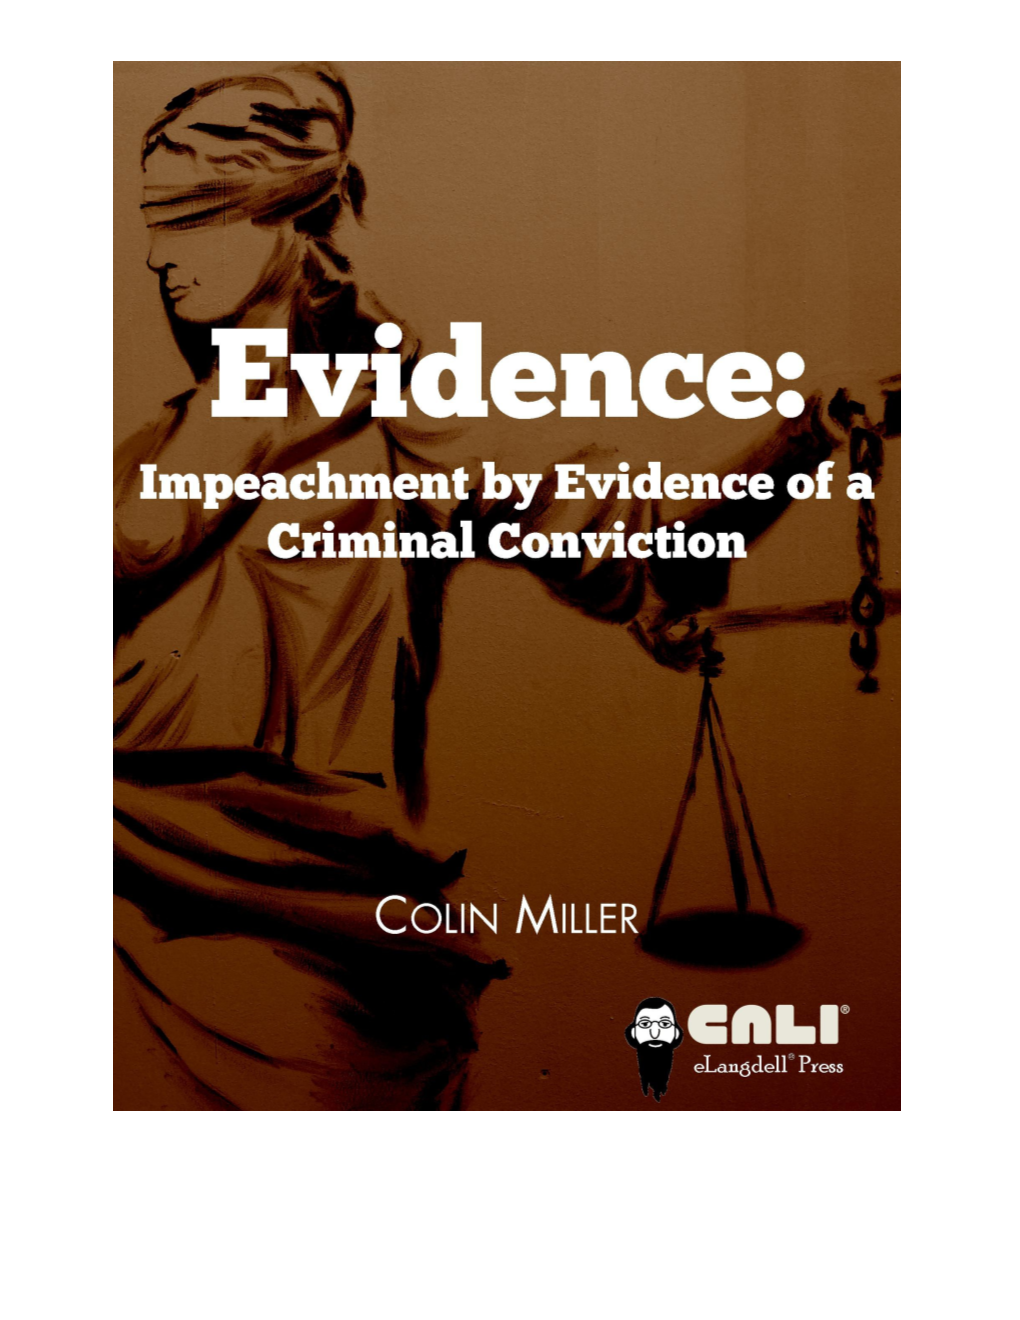 Impeachment by Evidence of a Criminal Conviction